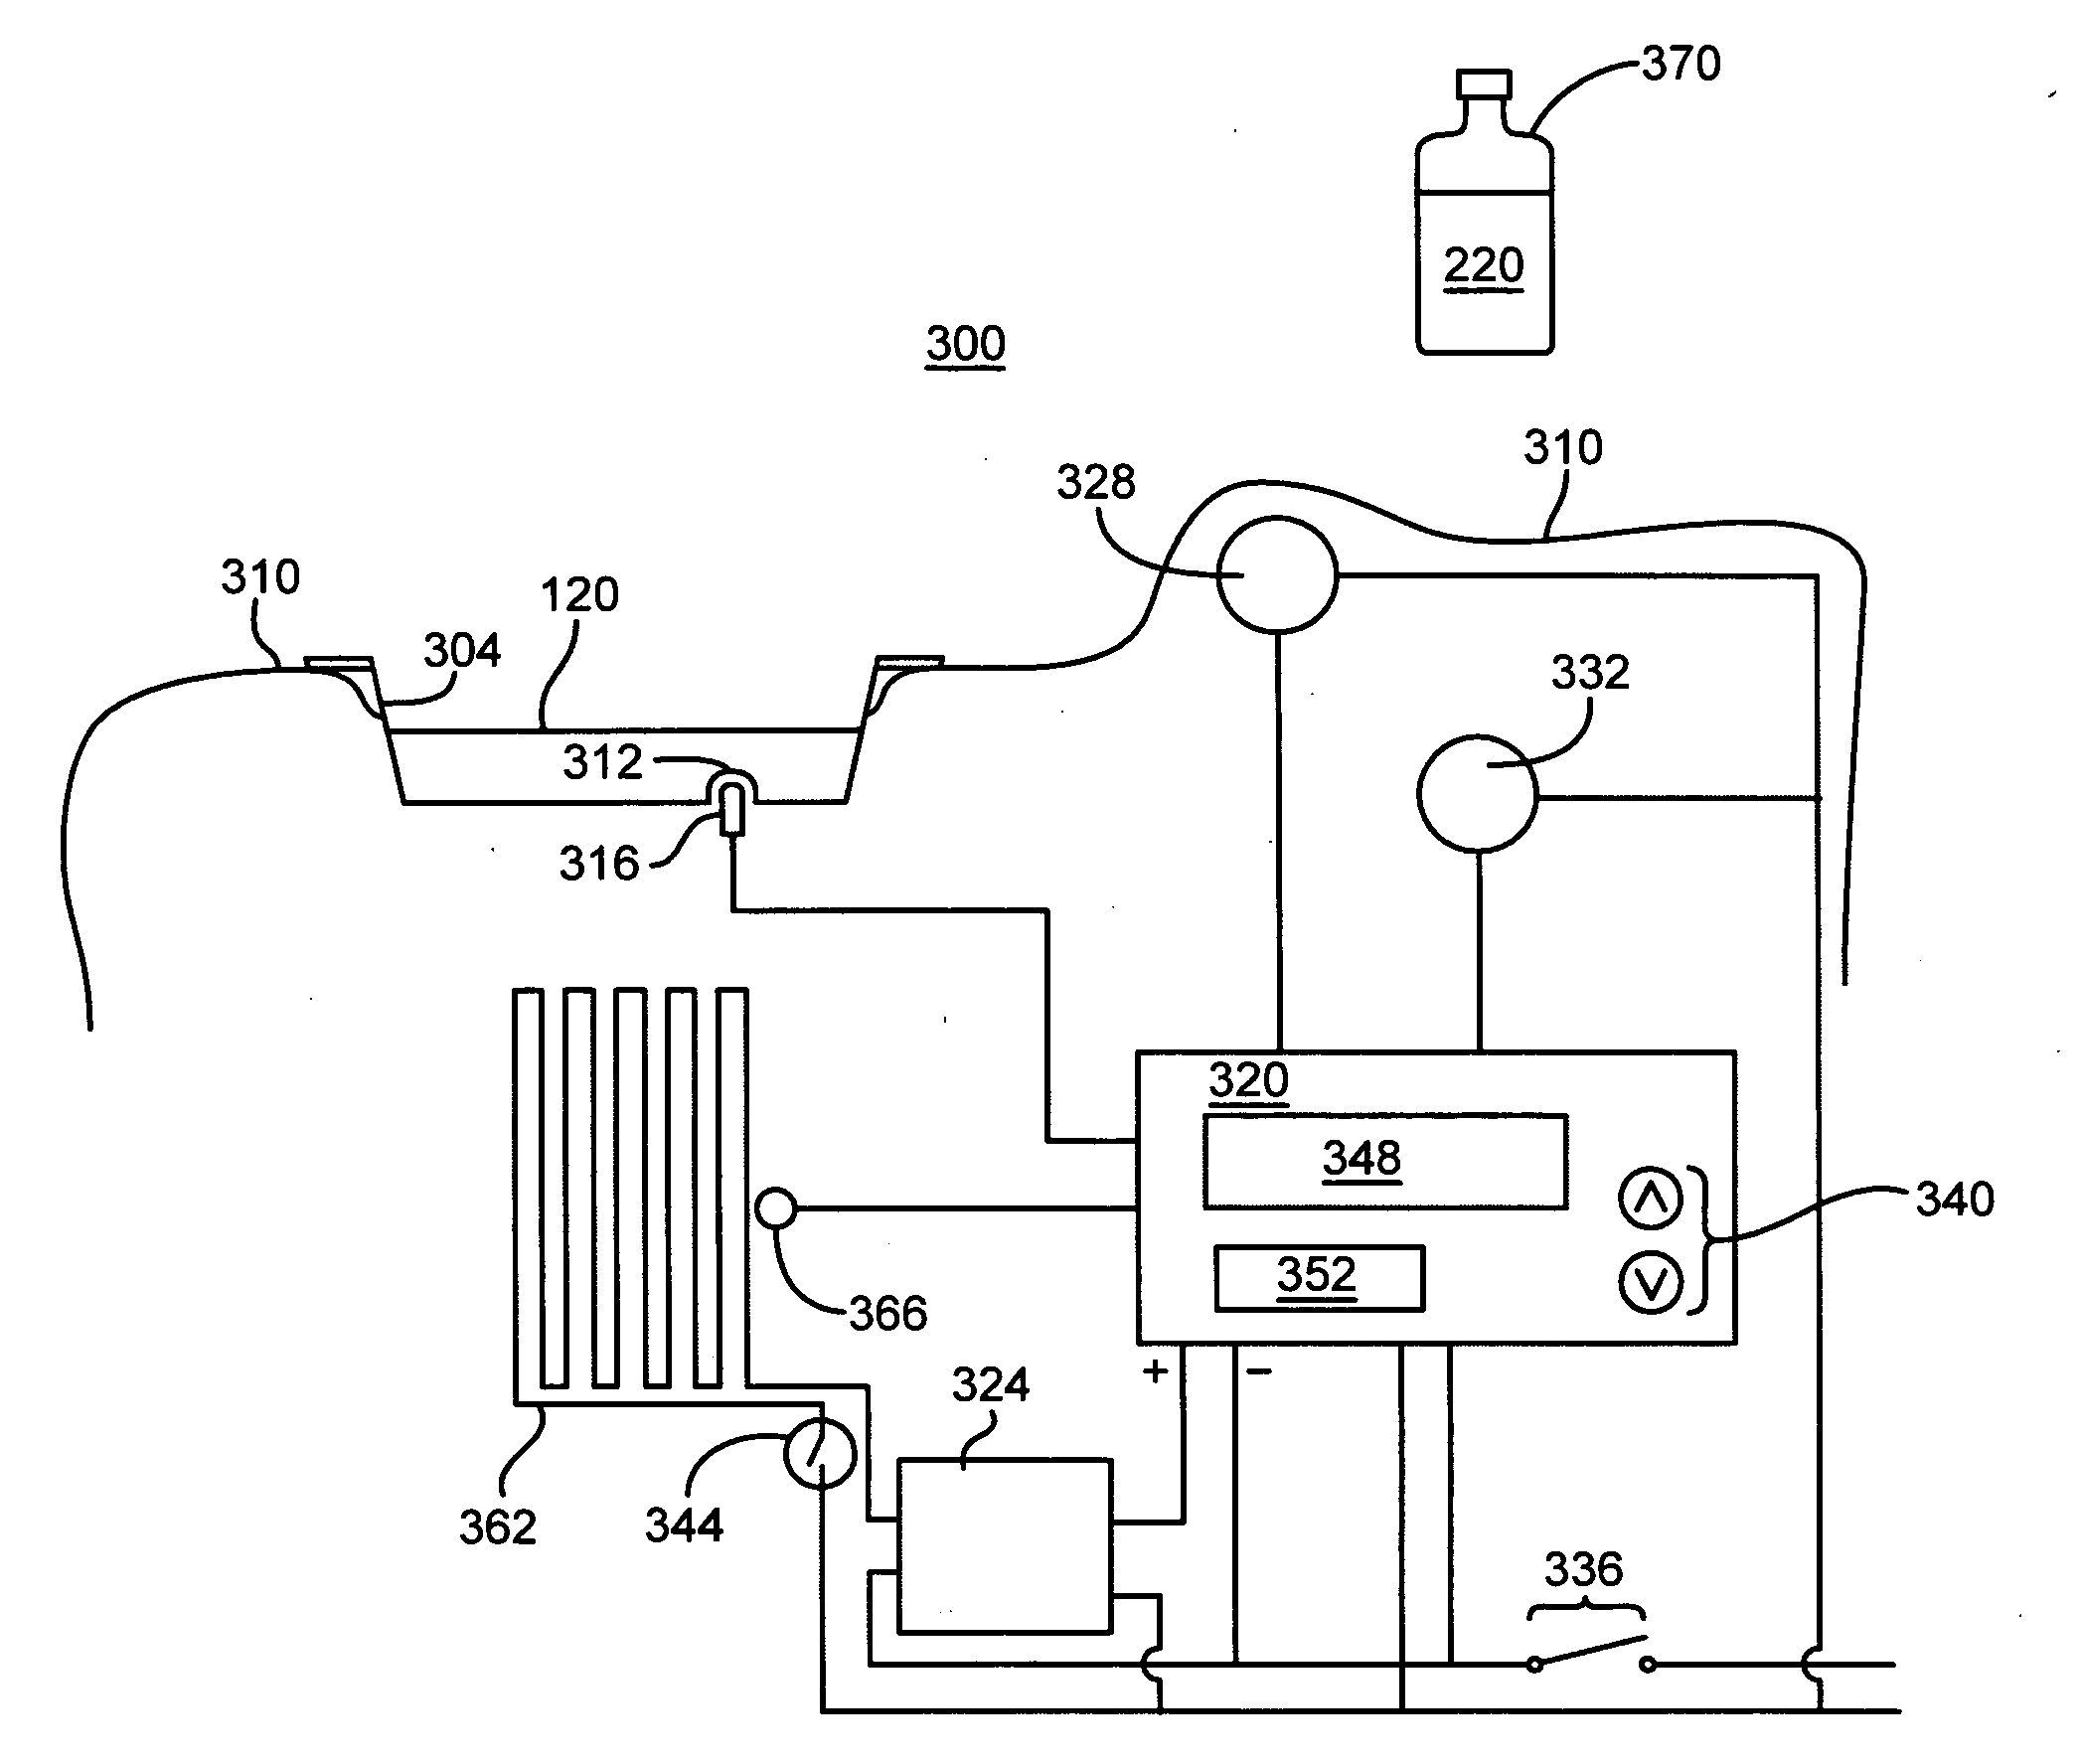 Open access sleeve for heated fluid units